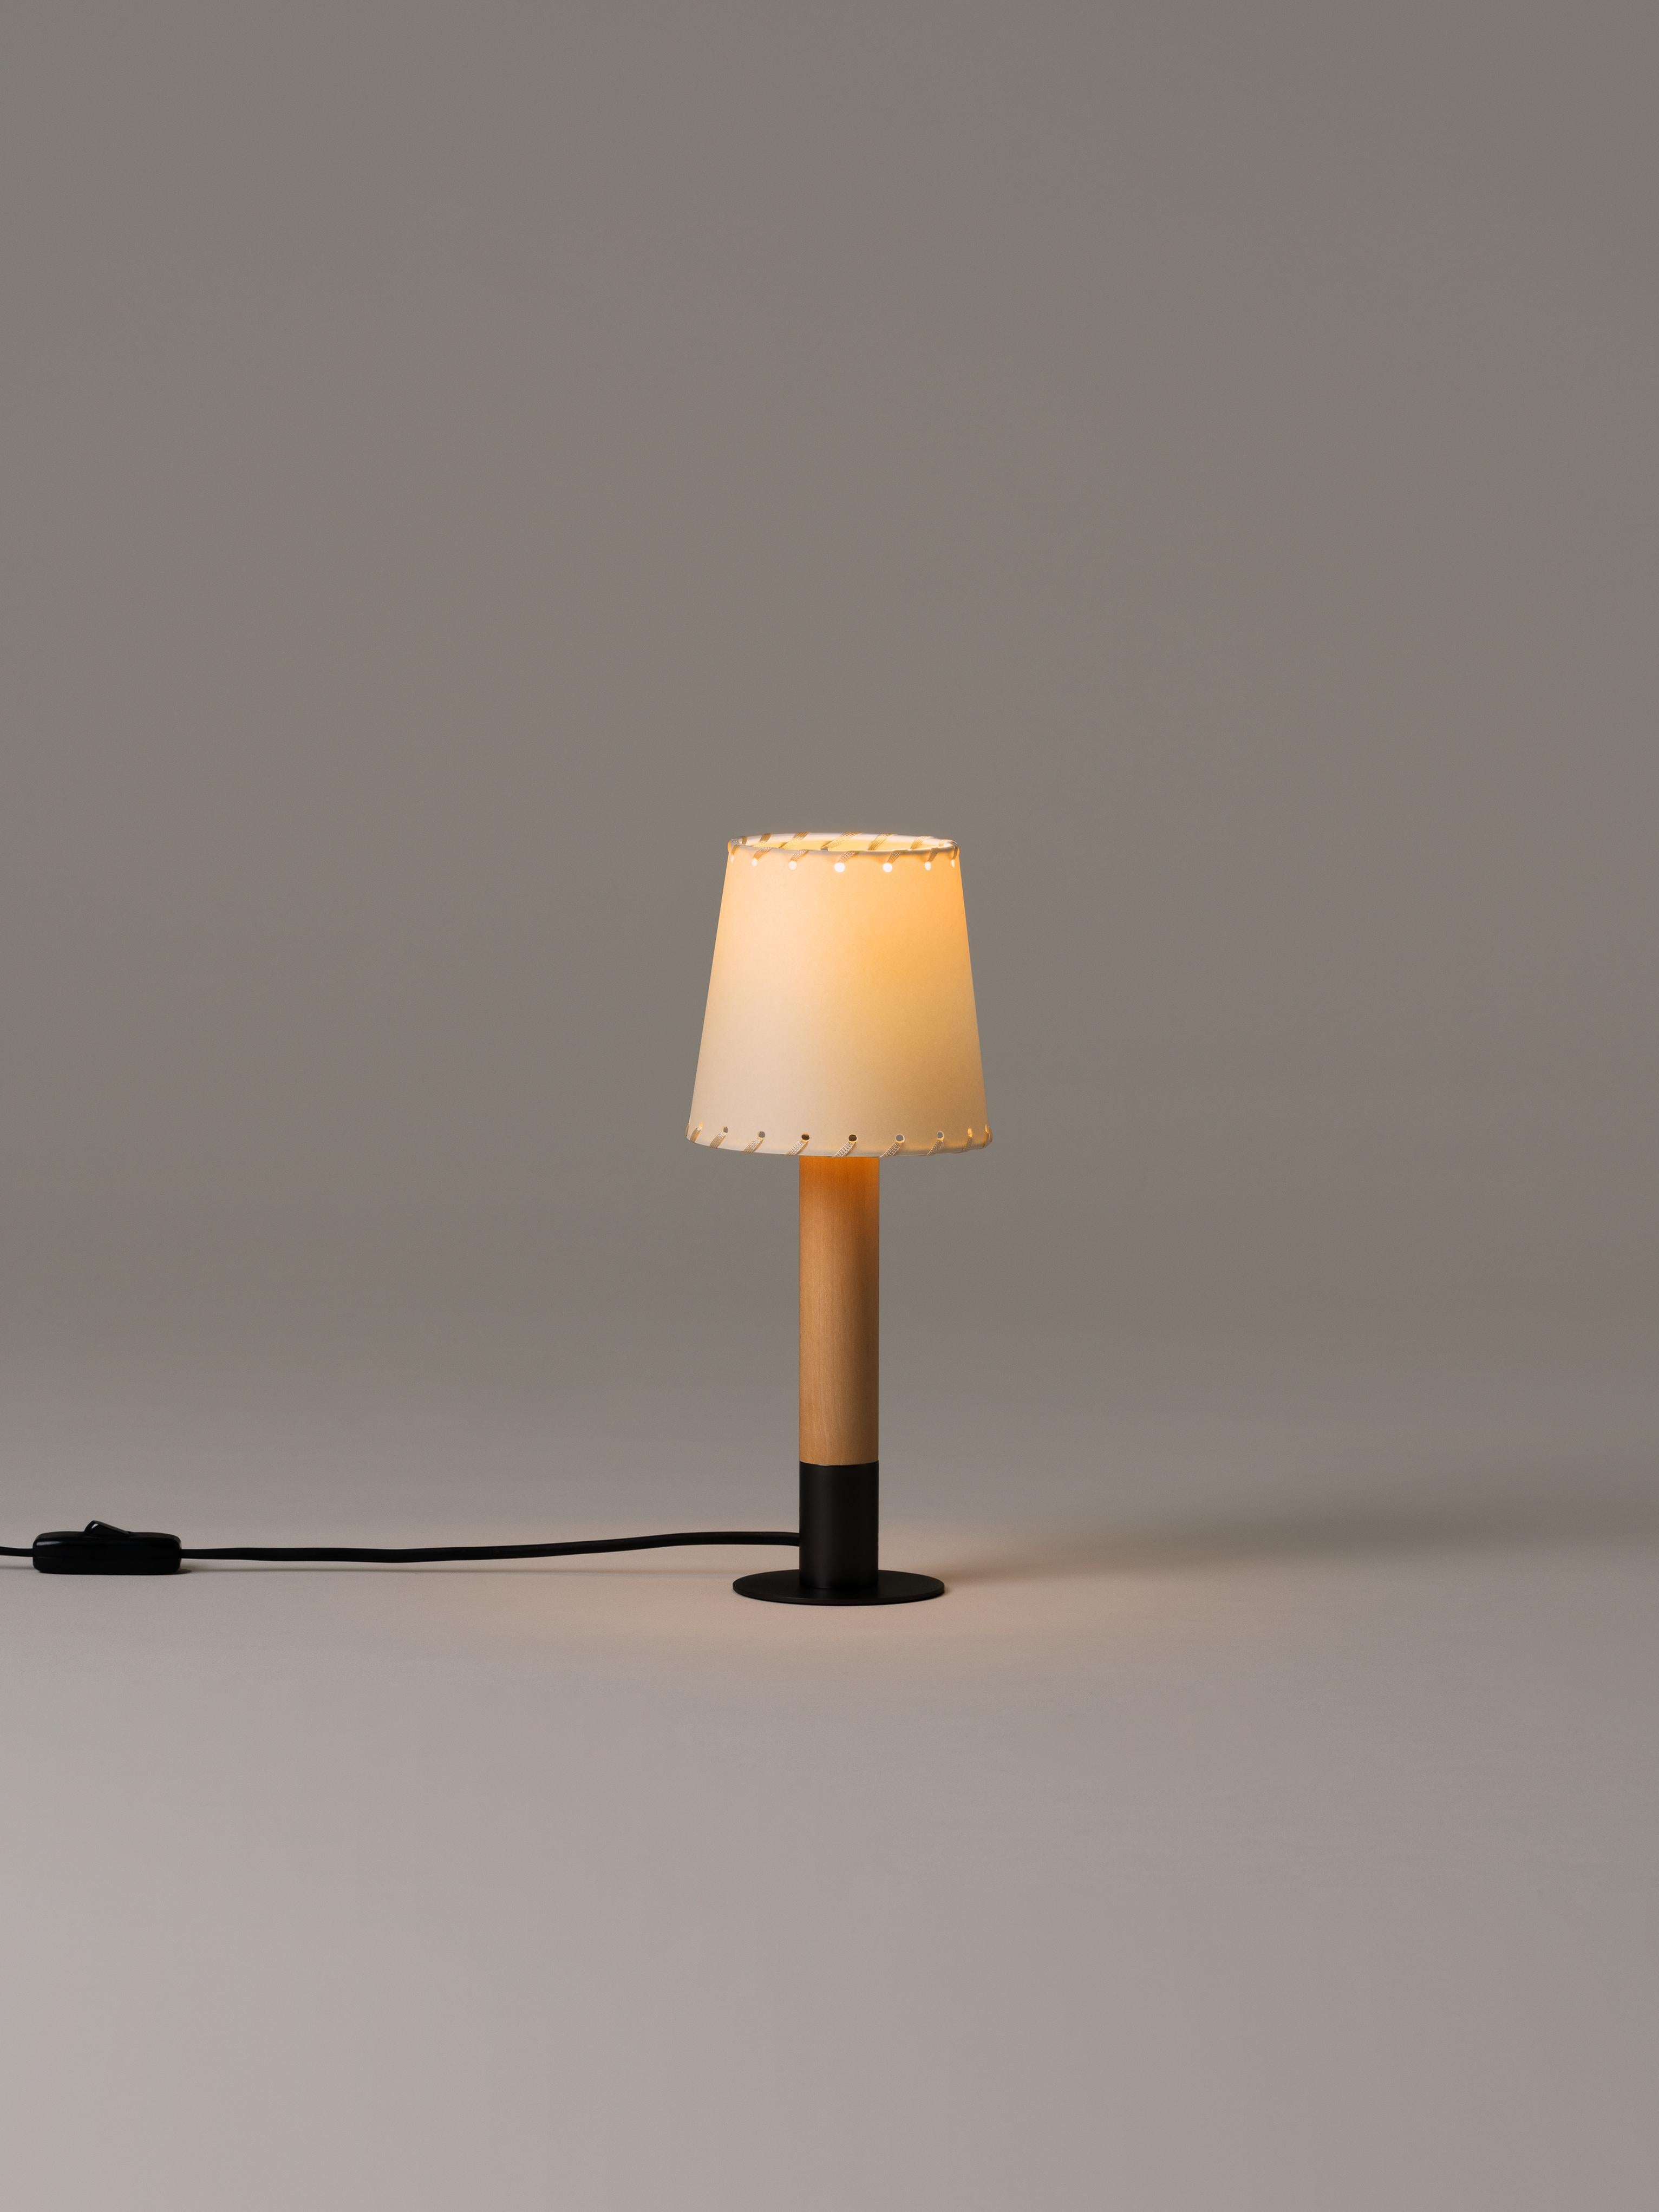 Bronze Básica Mínima table lamp by Santiago Roqueta, Santa & Cole
Dimensions: D 12 x H 30 cm
Materials: Bronze, birch wood, stitched parchment.

Básica Mínima is the pocket edition of the Básica lamp. On its own or with others, it combines